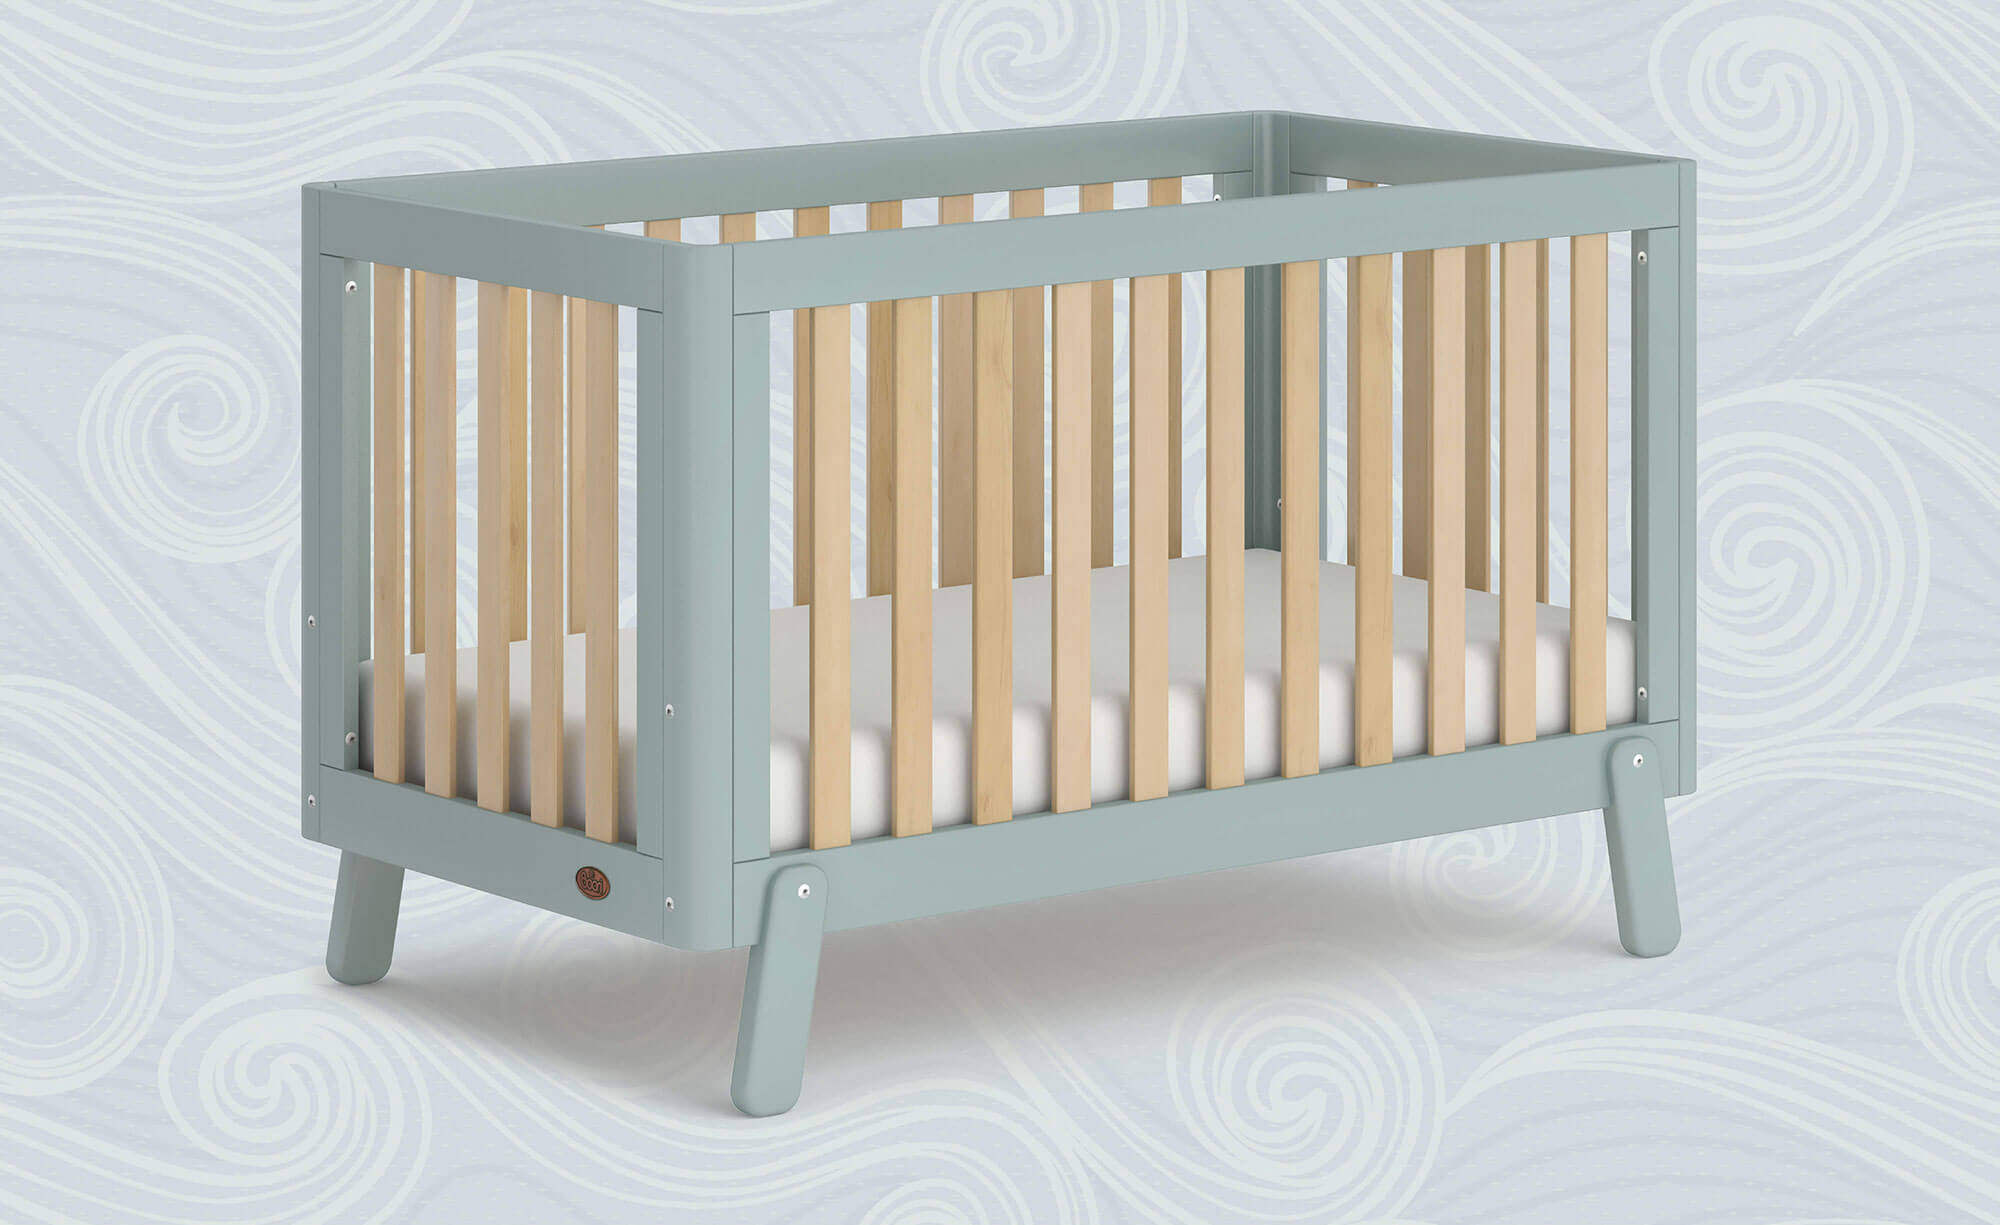 Turin Cot Bed in blueberry and almond